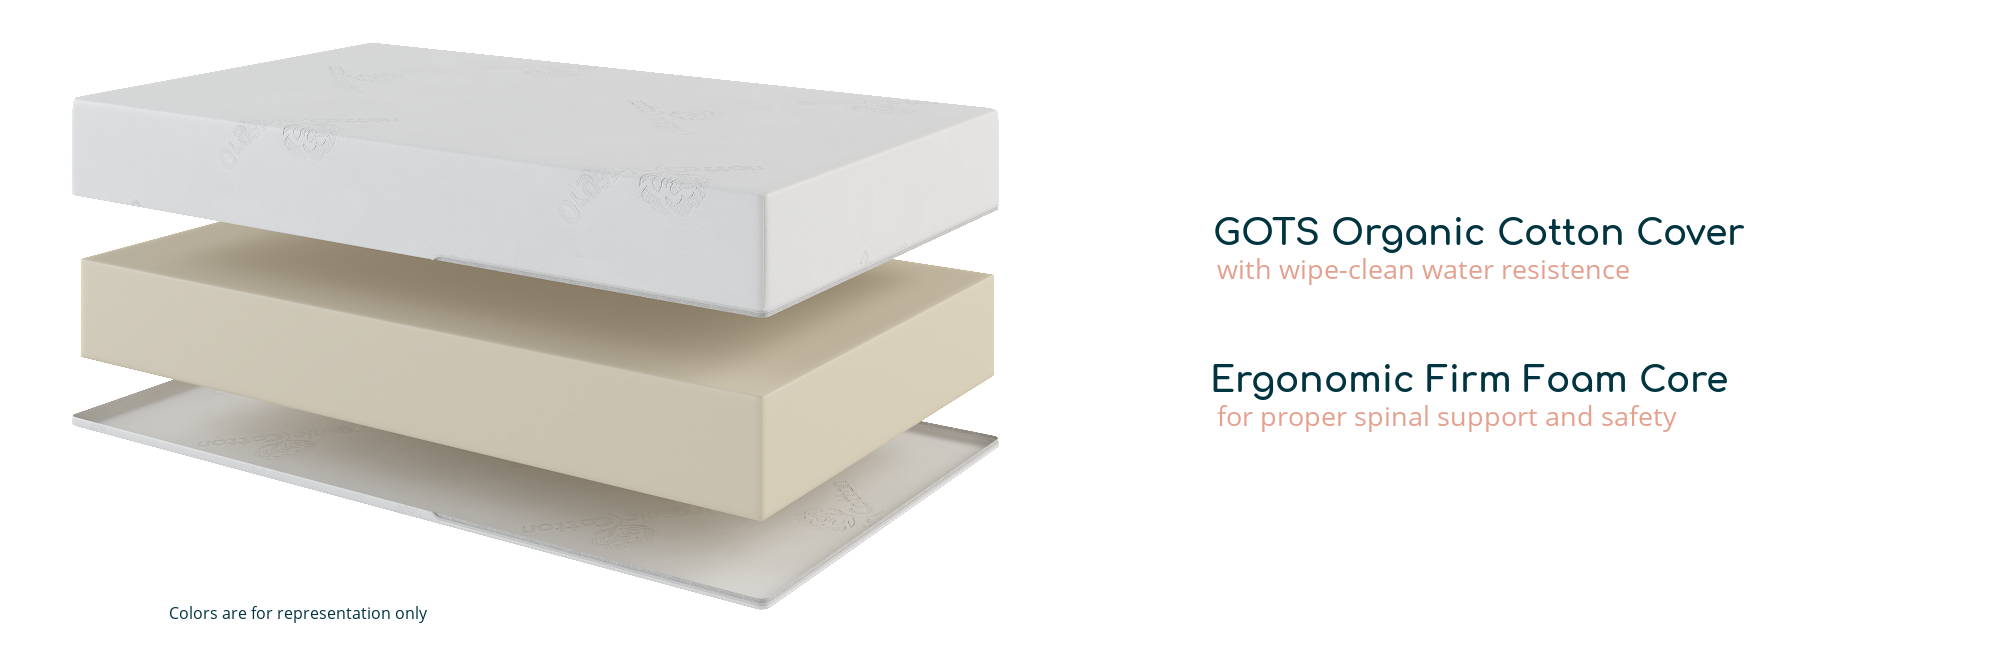 GOTS Organic Cotton Cover-with wipe clean resistance, Ergonomic Firm Foam Core-for proper spinal support and safety.